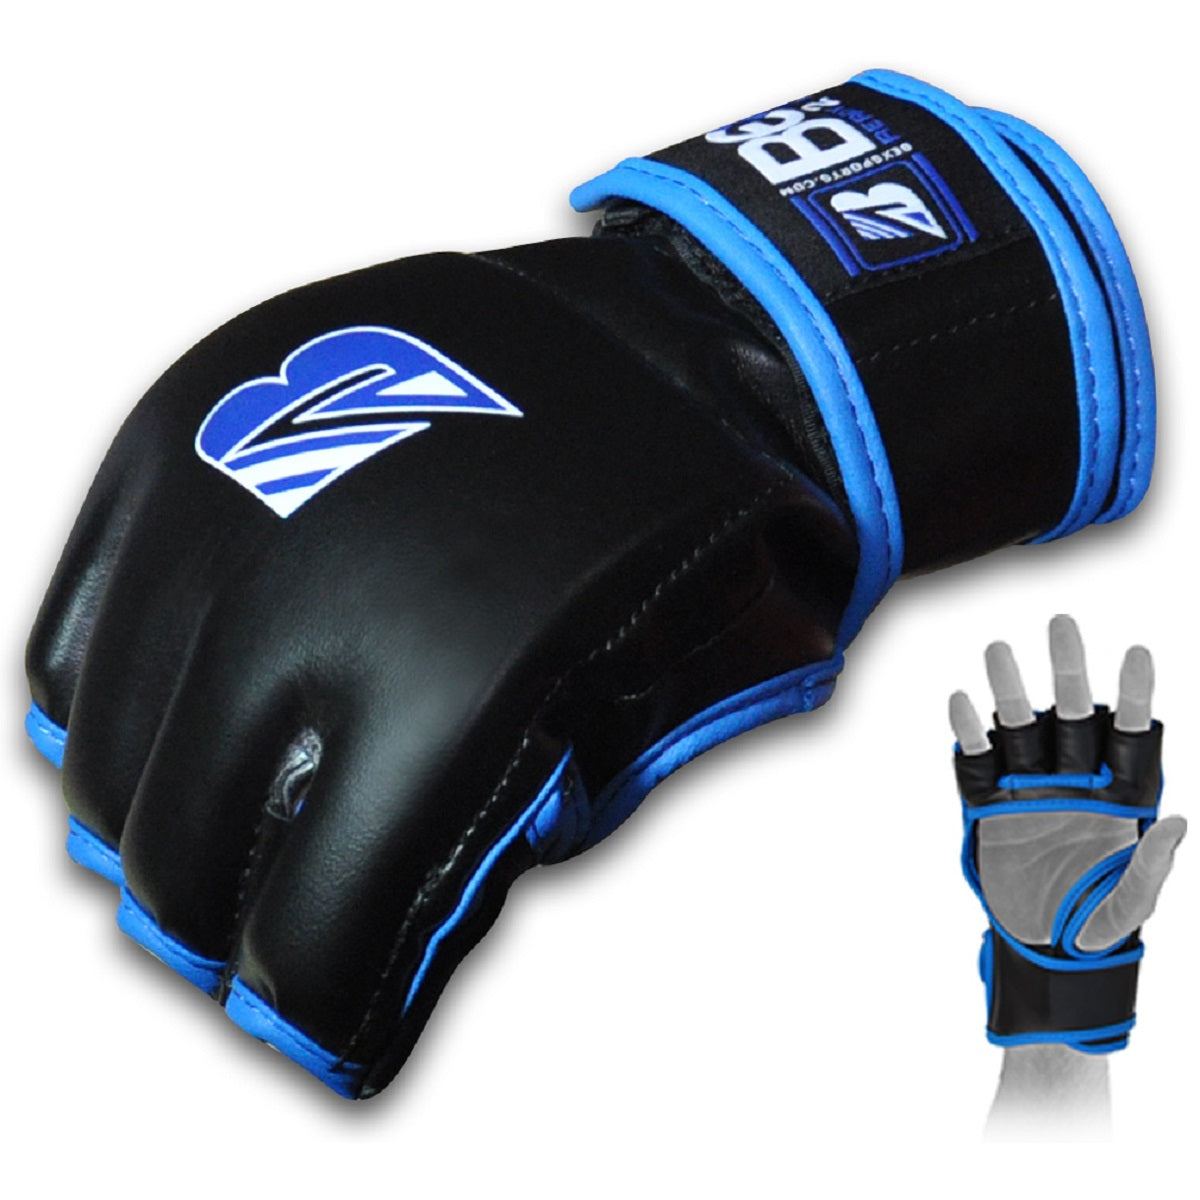 MMA Gloves Ultimate MMA Fingerless Boxing Gloves: Premium Quality, Pro-Grade Gear Fighters and Athlete